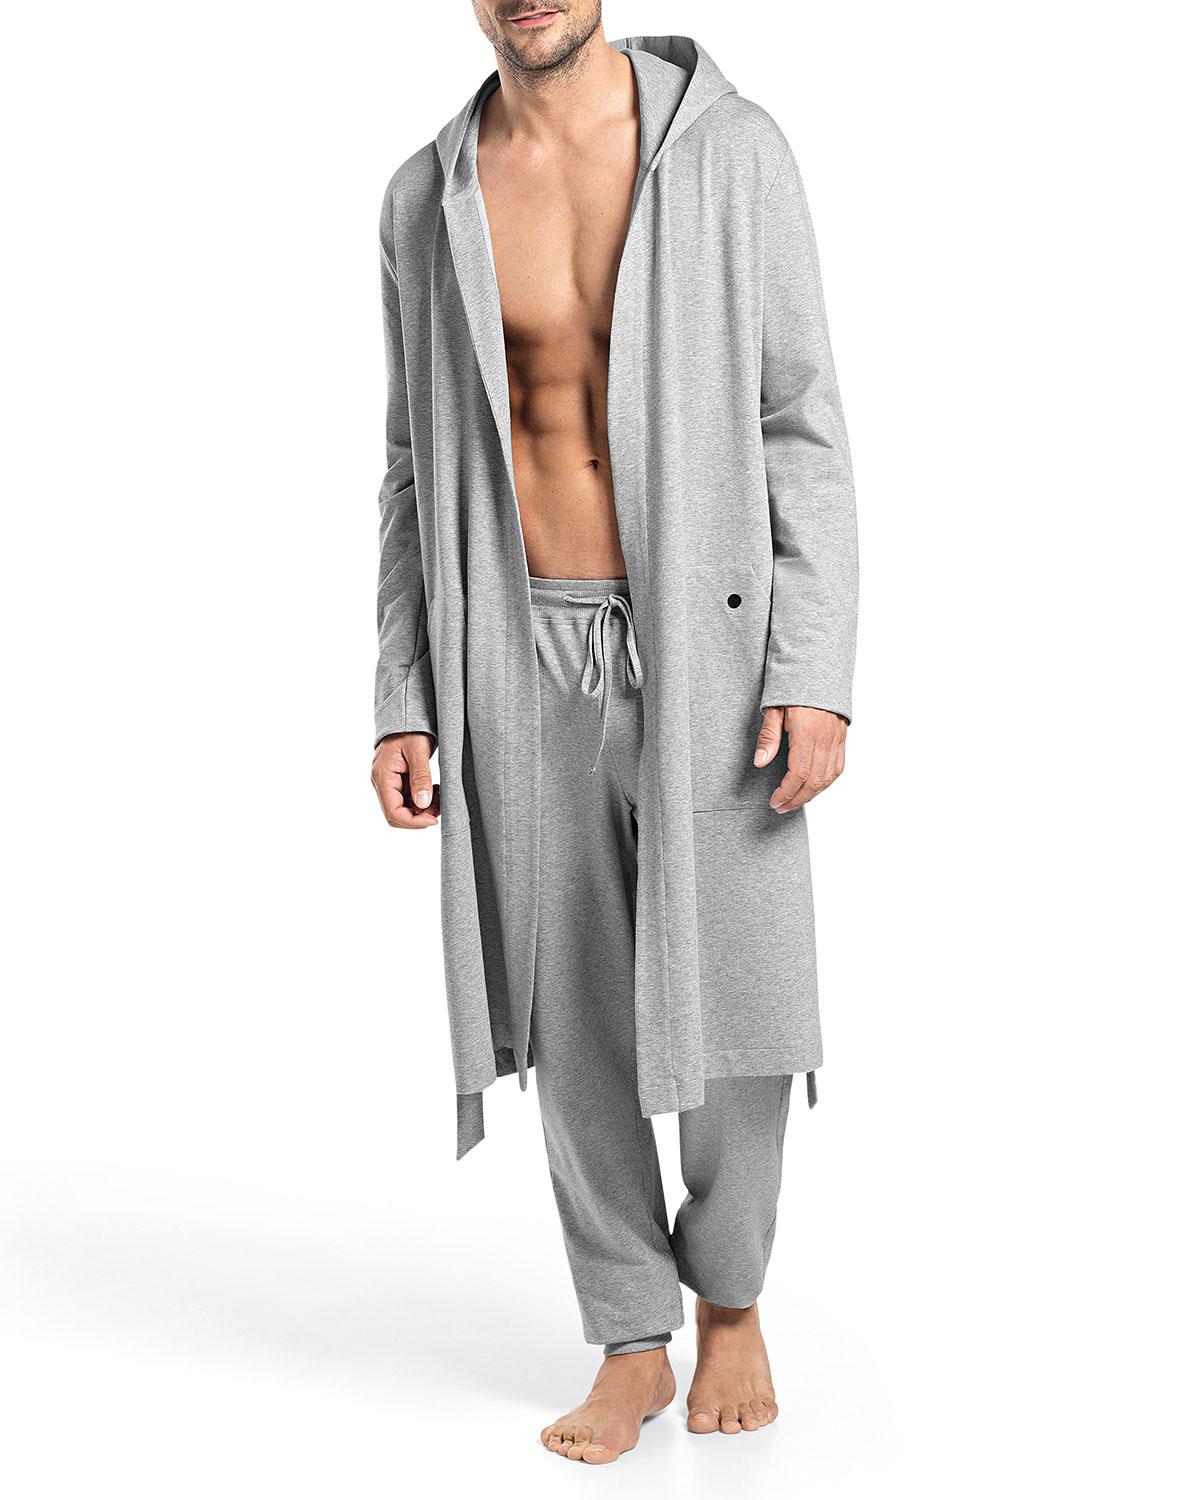 Lyst - Hanro Luis Hooded Wrap Robe in Gray for Men